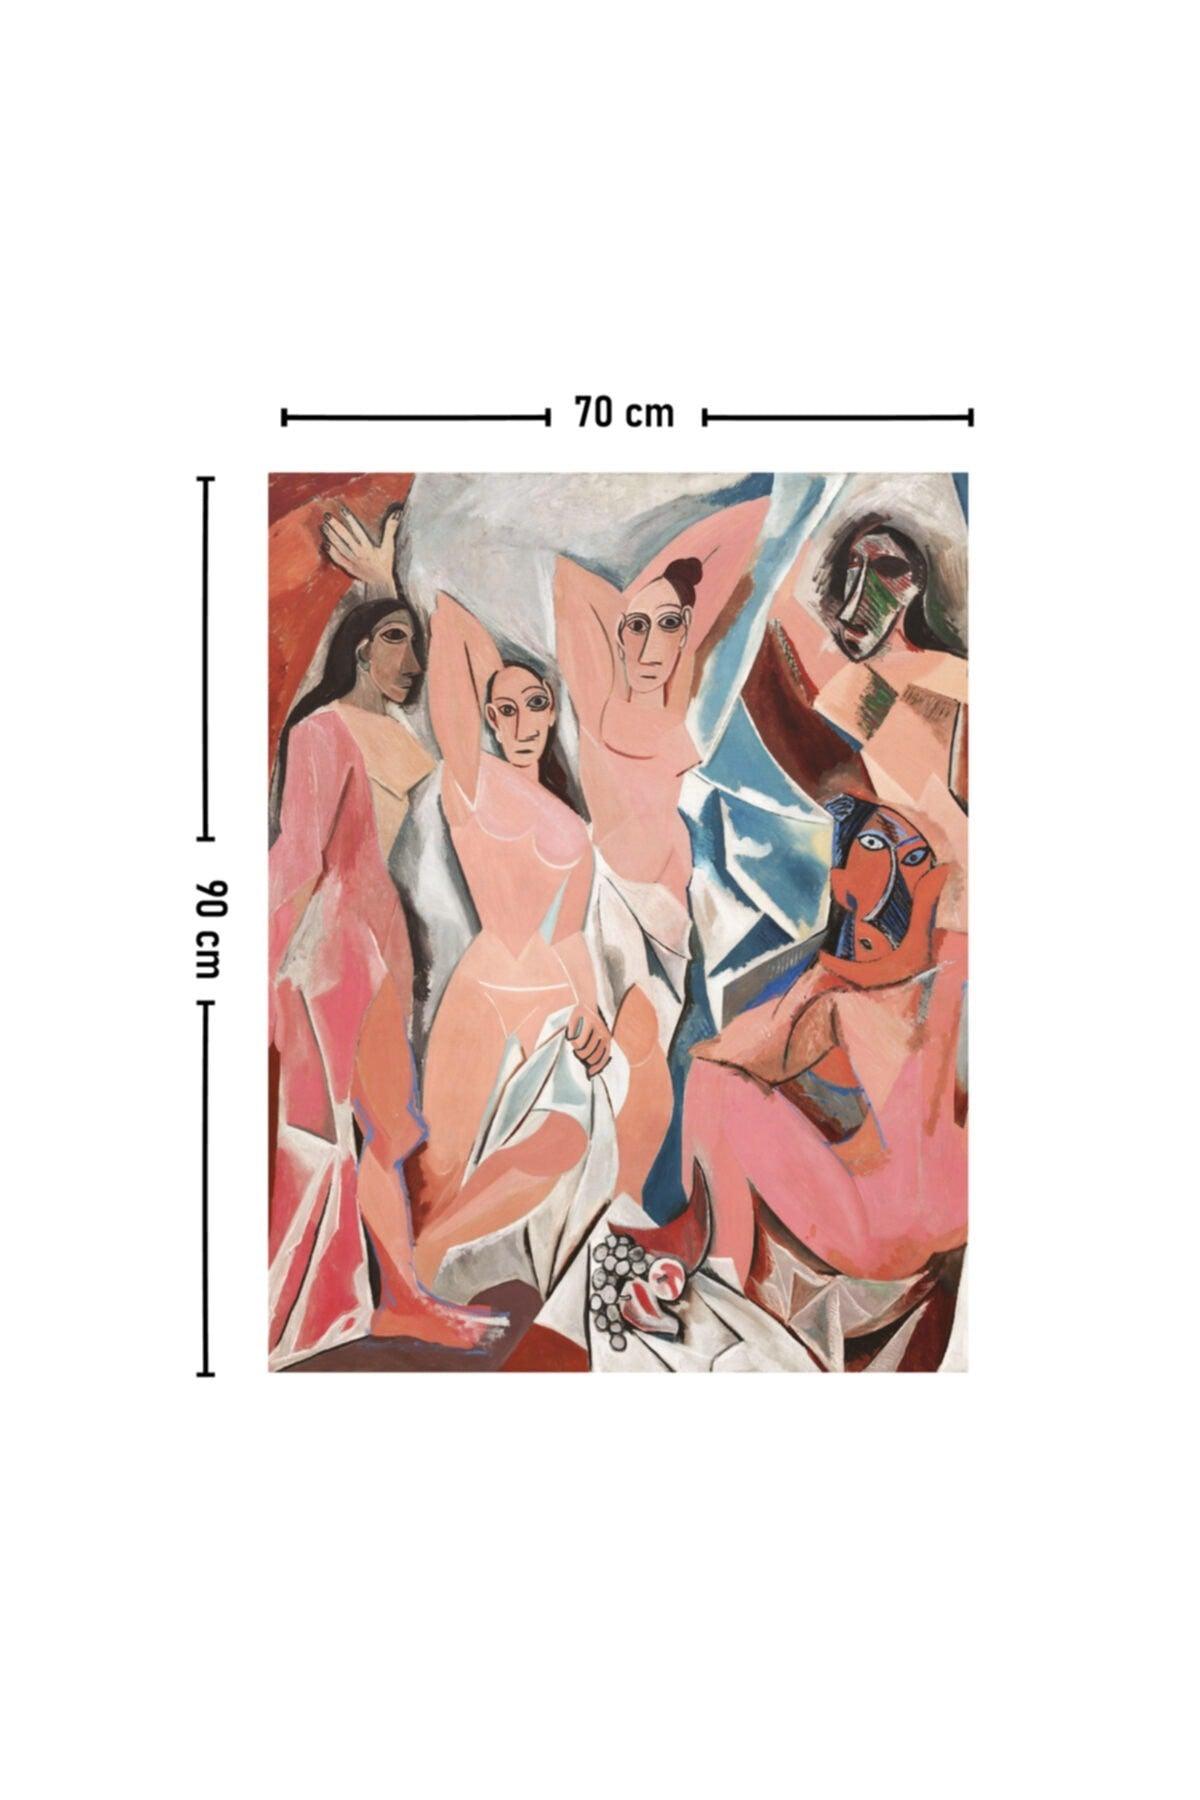 Pablo Picasso Girls from Avignon Wall Covering Rug 70x90 Cm - Swordslife